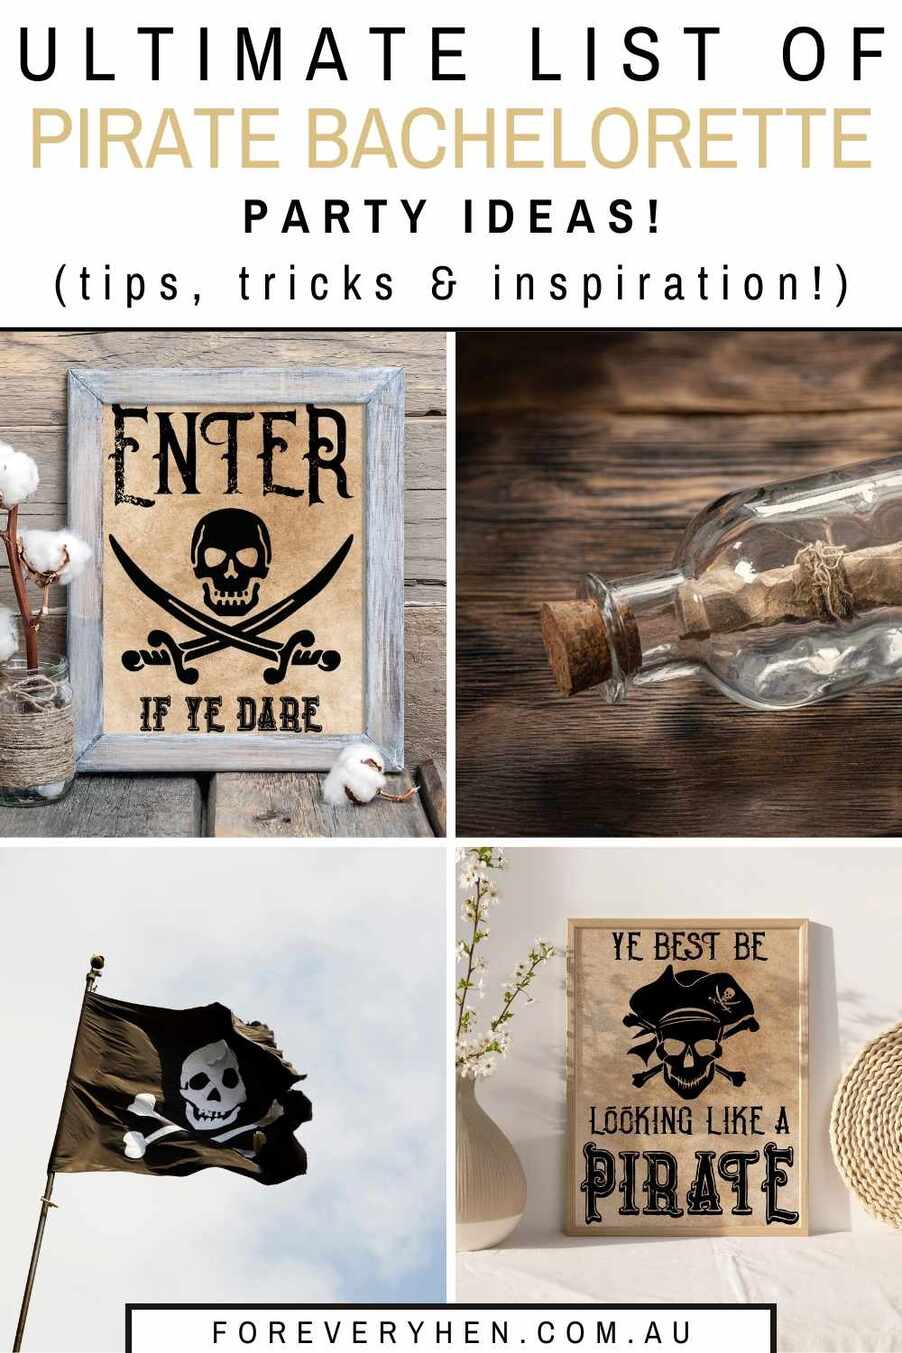 Collage of pirate party decorations including a message in a bottle, 'enter if ye dare' sign, pirate flag, and pirate photo booth sign. Text overlay: Ultimate list of pirate bachelorette party ideas! Tips, tricks and inspiration!